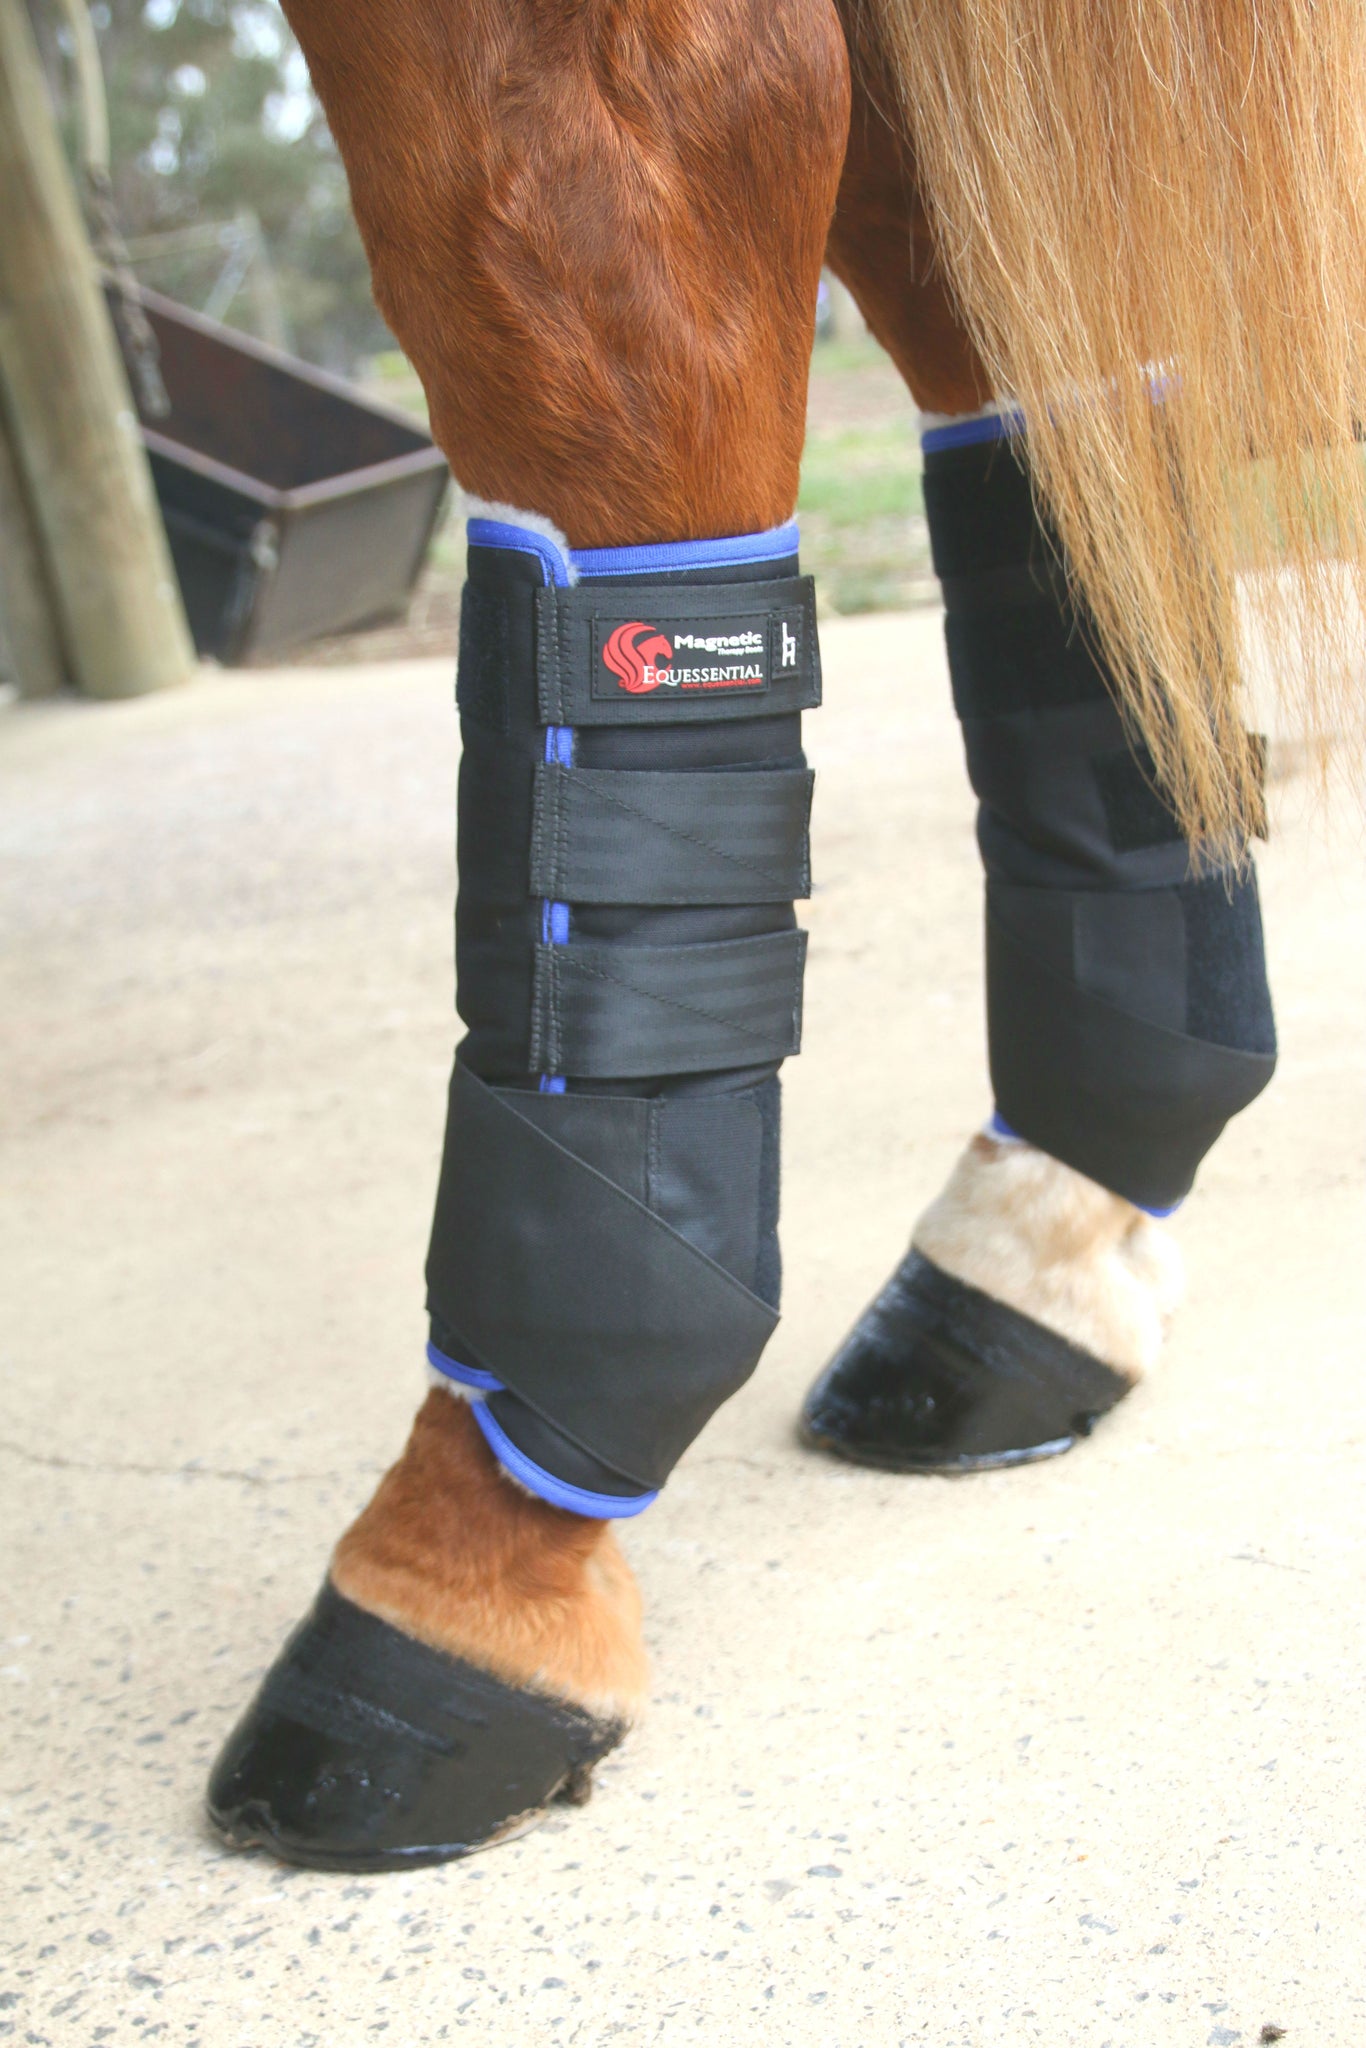 Magnetic Shin/Fetlock Boots – Equessential